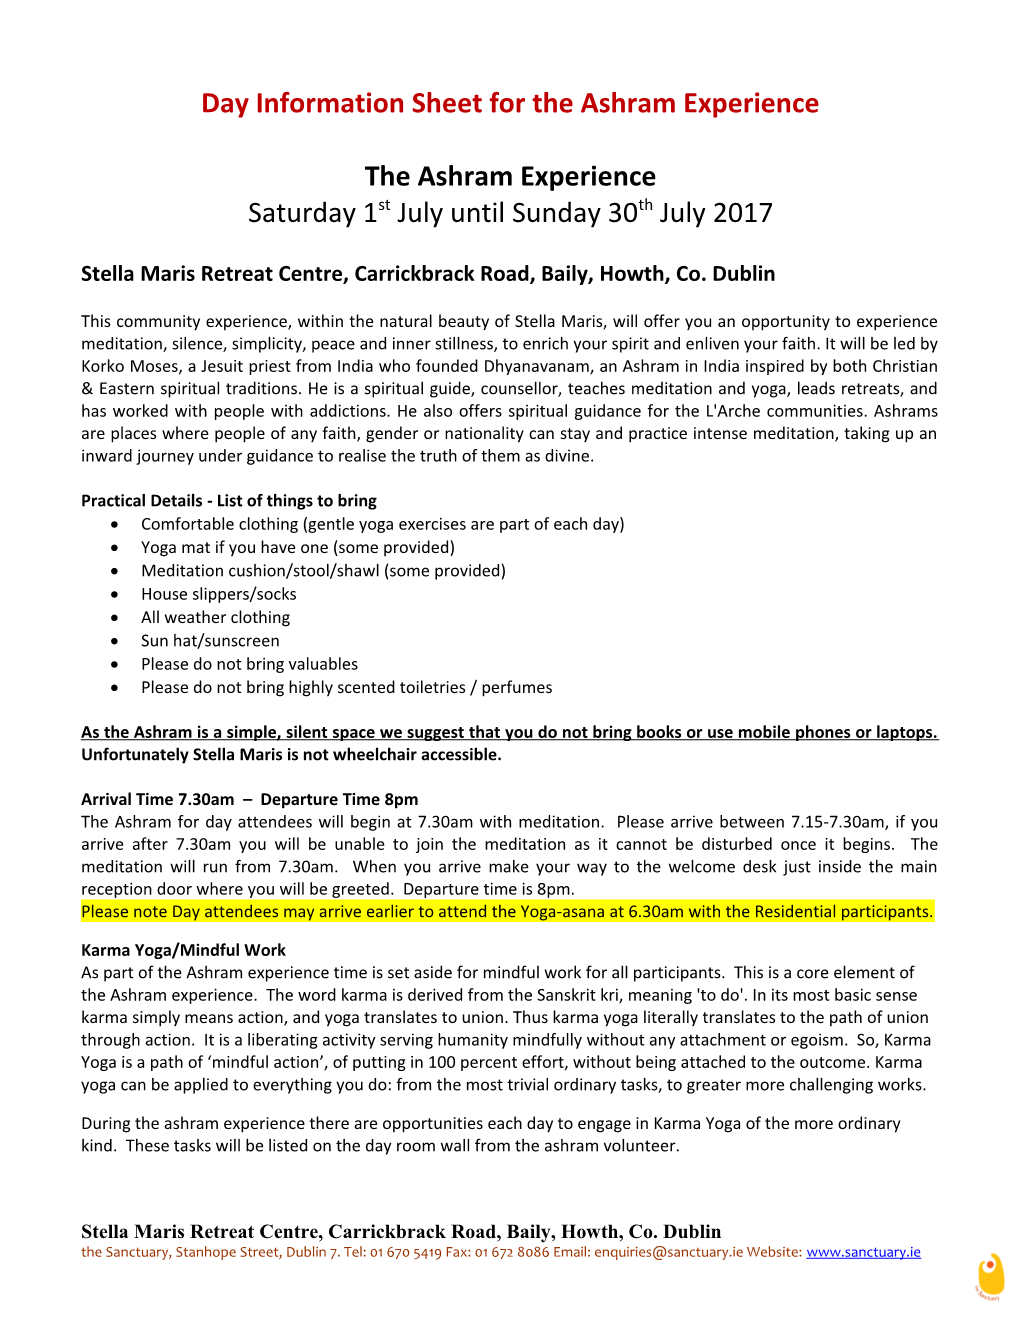 Information Sheet for the Ashram Experience